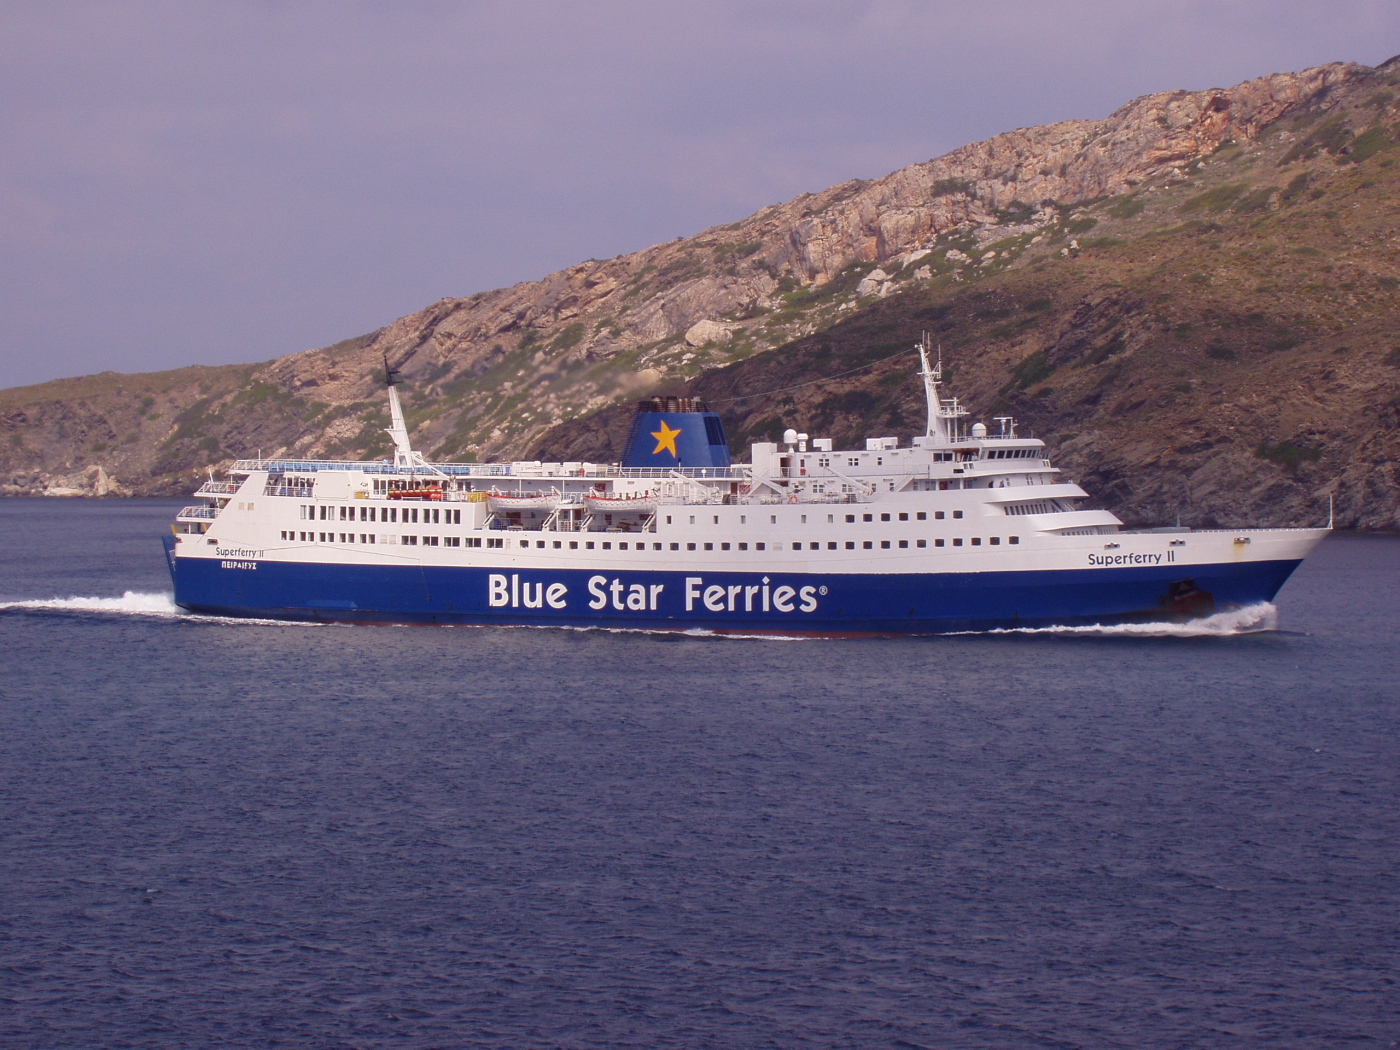 superferryII arriving @andros 280505 c